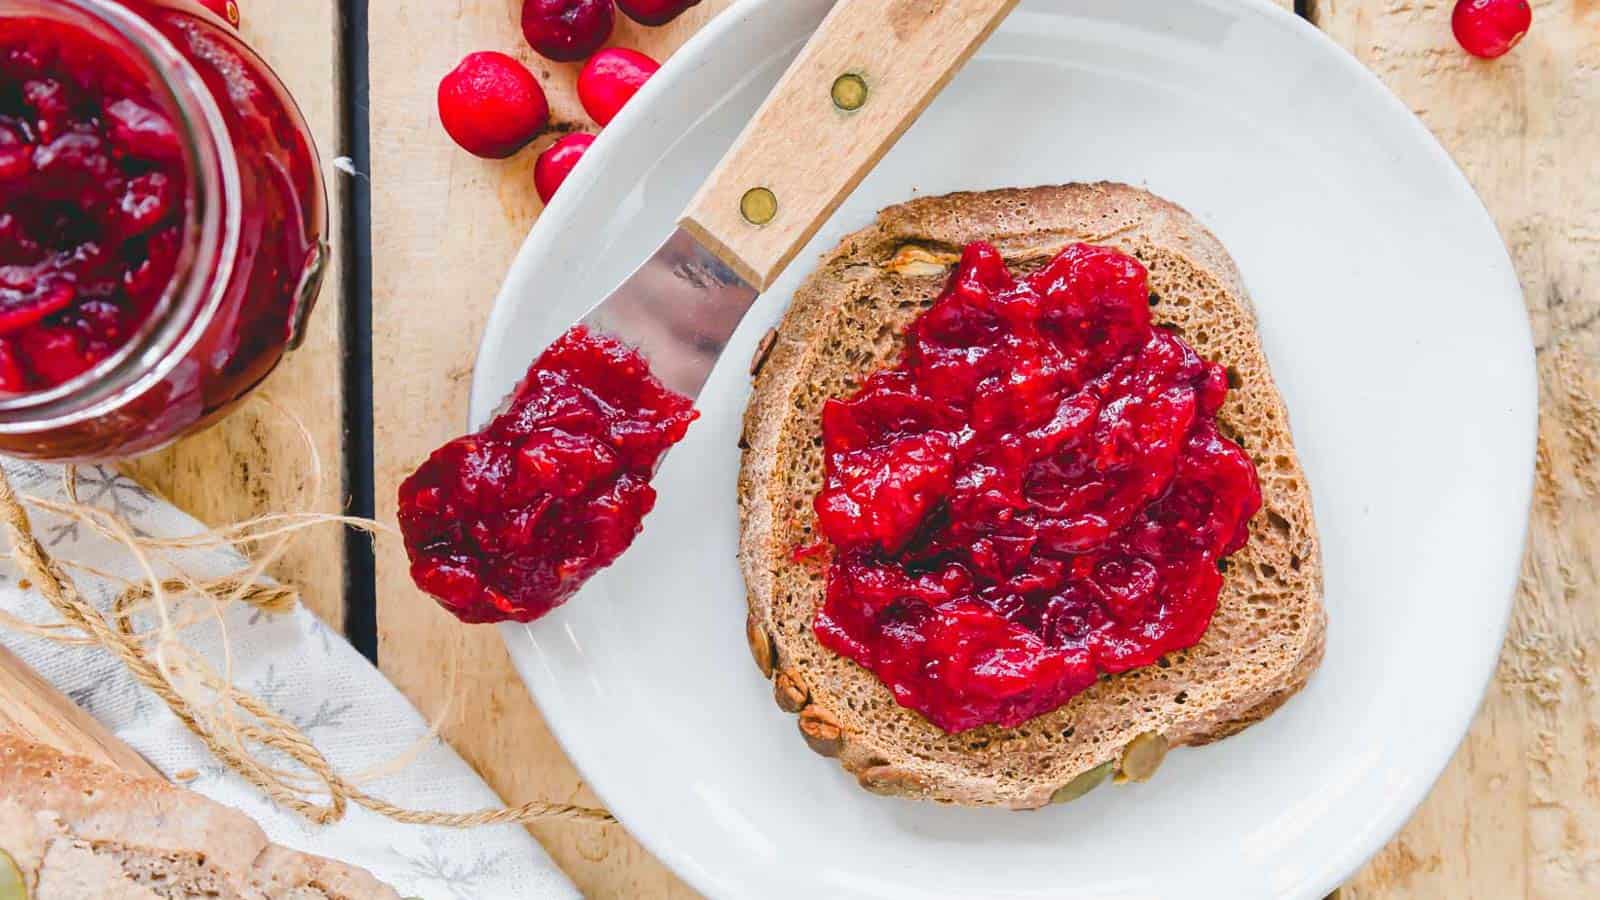 Cranberry ginger jam on bread with a wooden spoon.